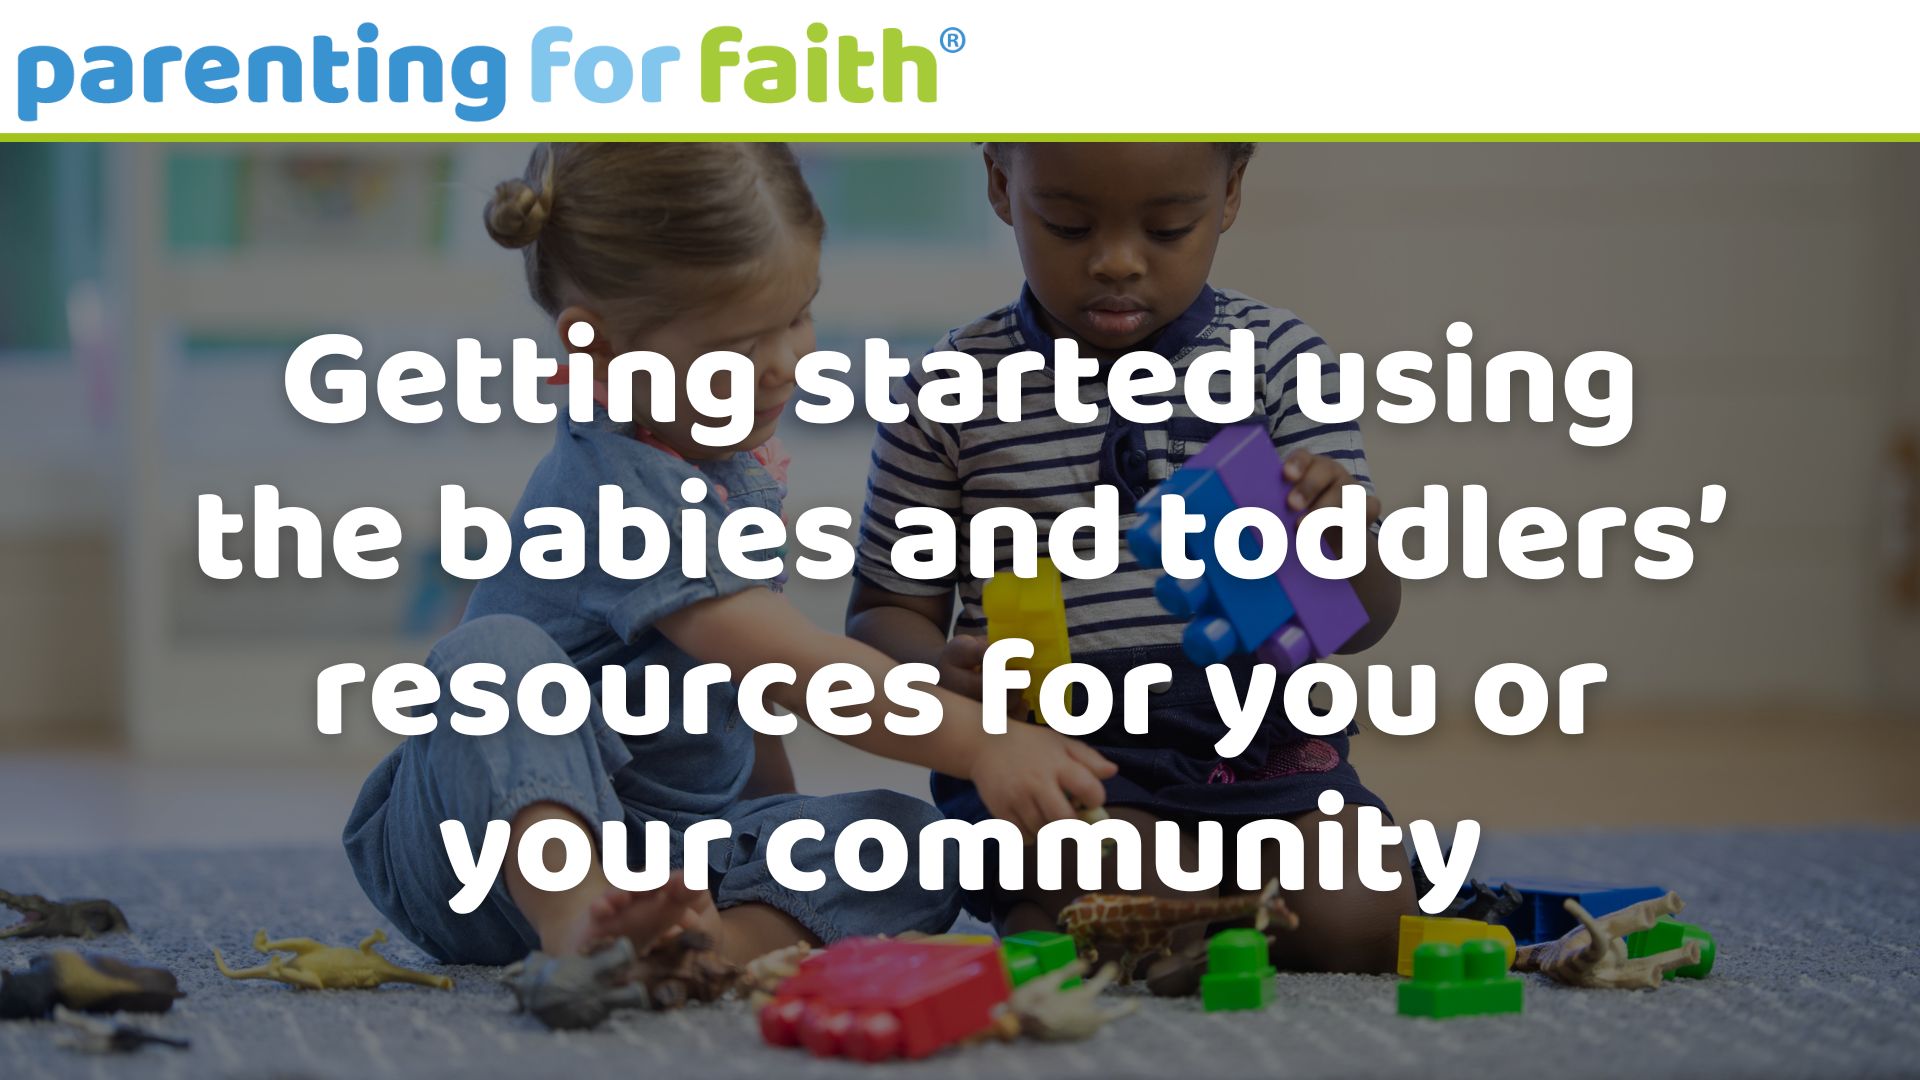 Getting started using the babies and toddlers’ resources for you or your community Image credit Fat Camera from Getty Images Signature